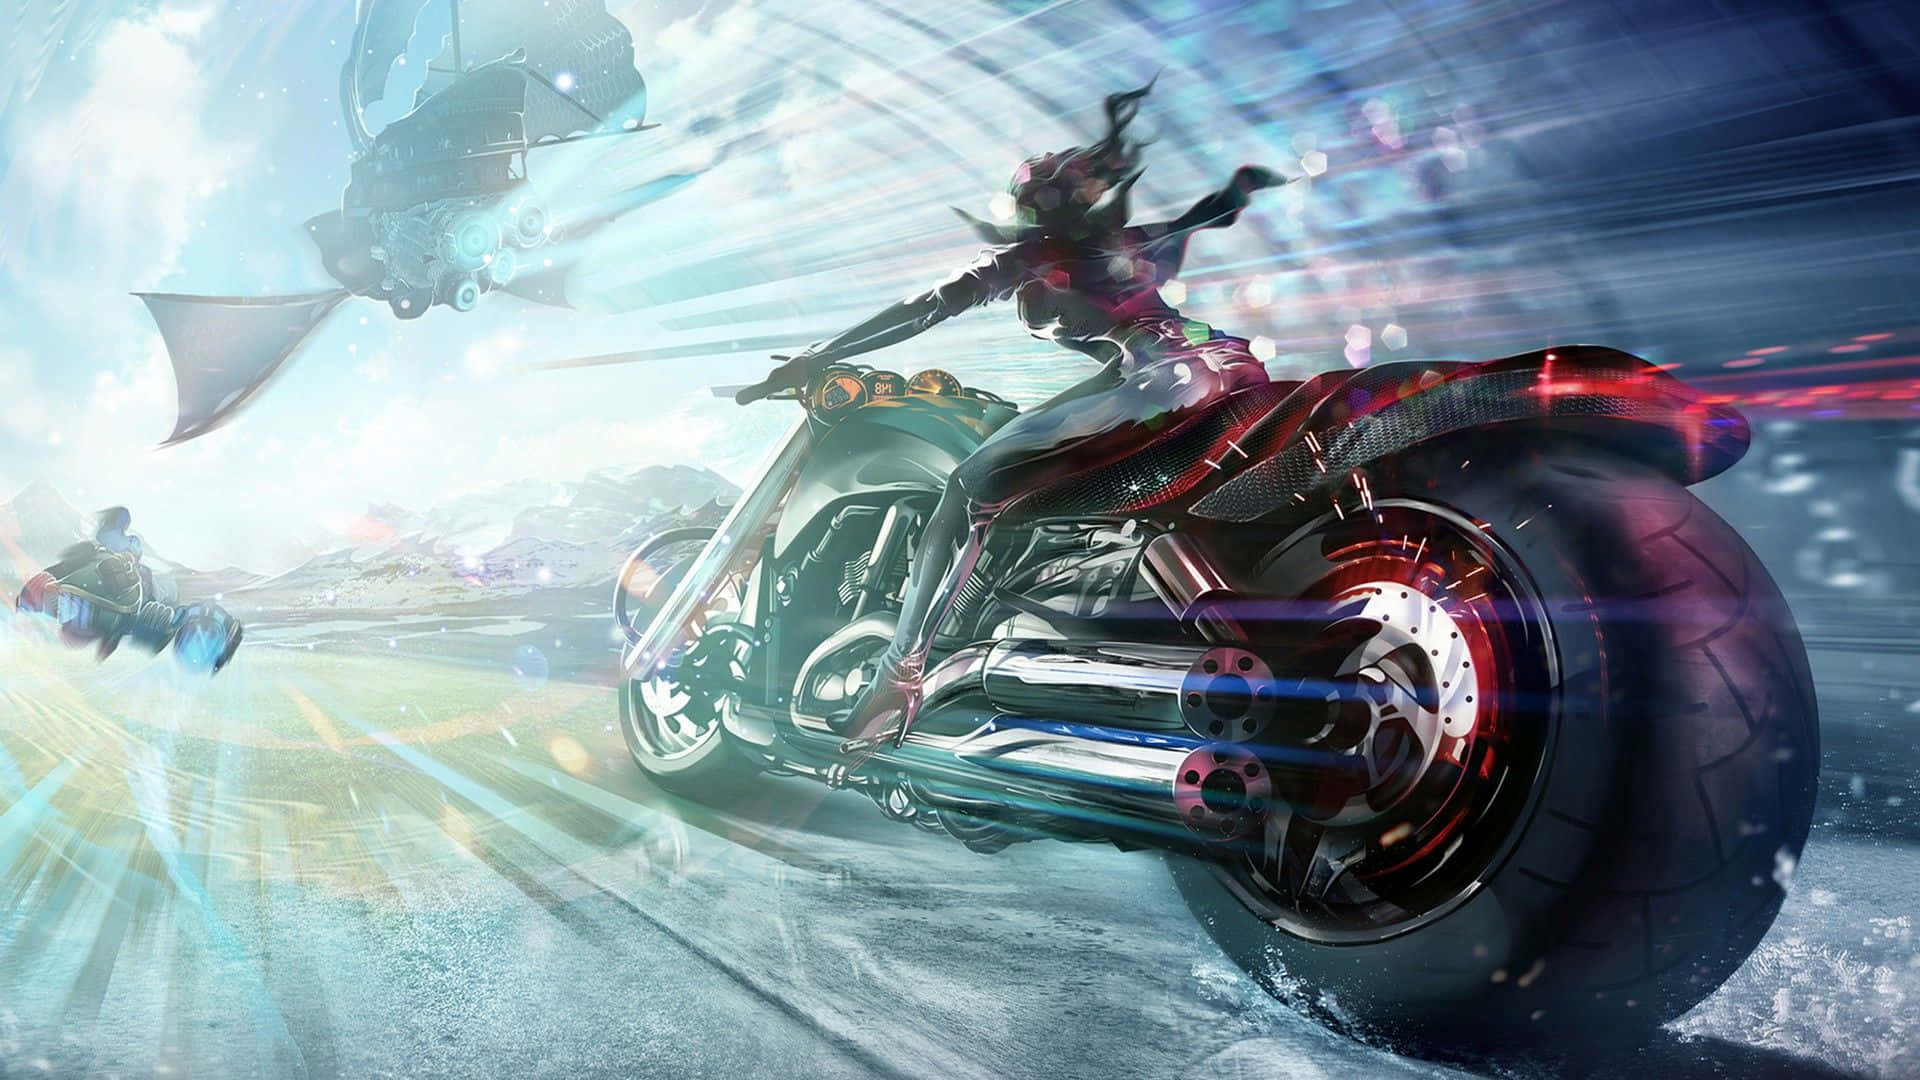 Fantasy Picture Of Motorbike Chase